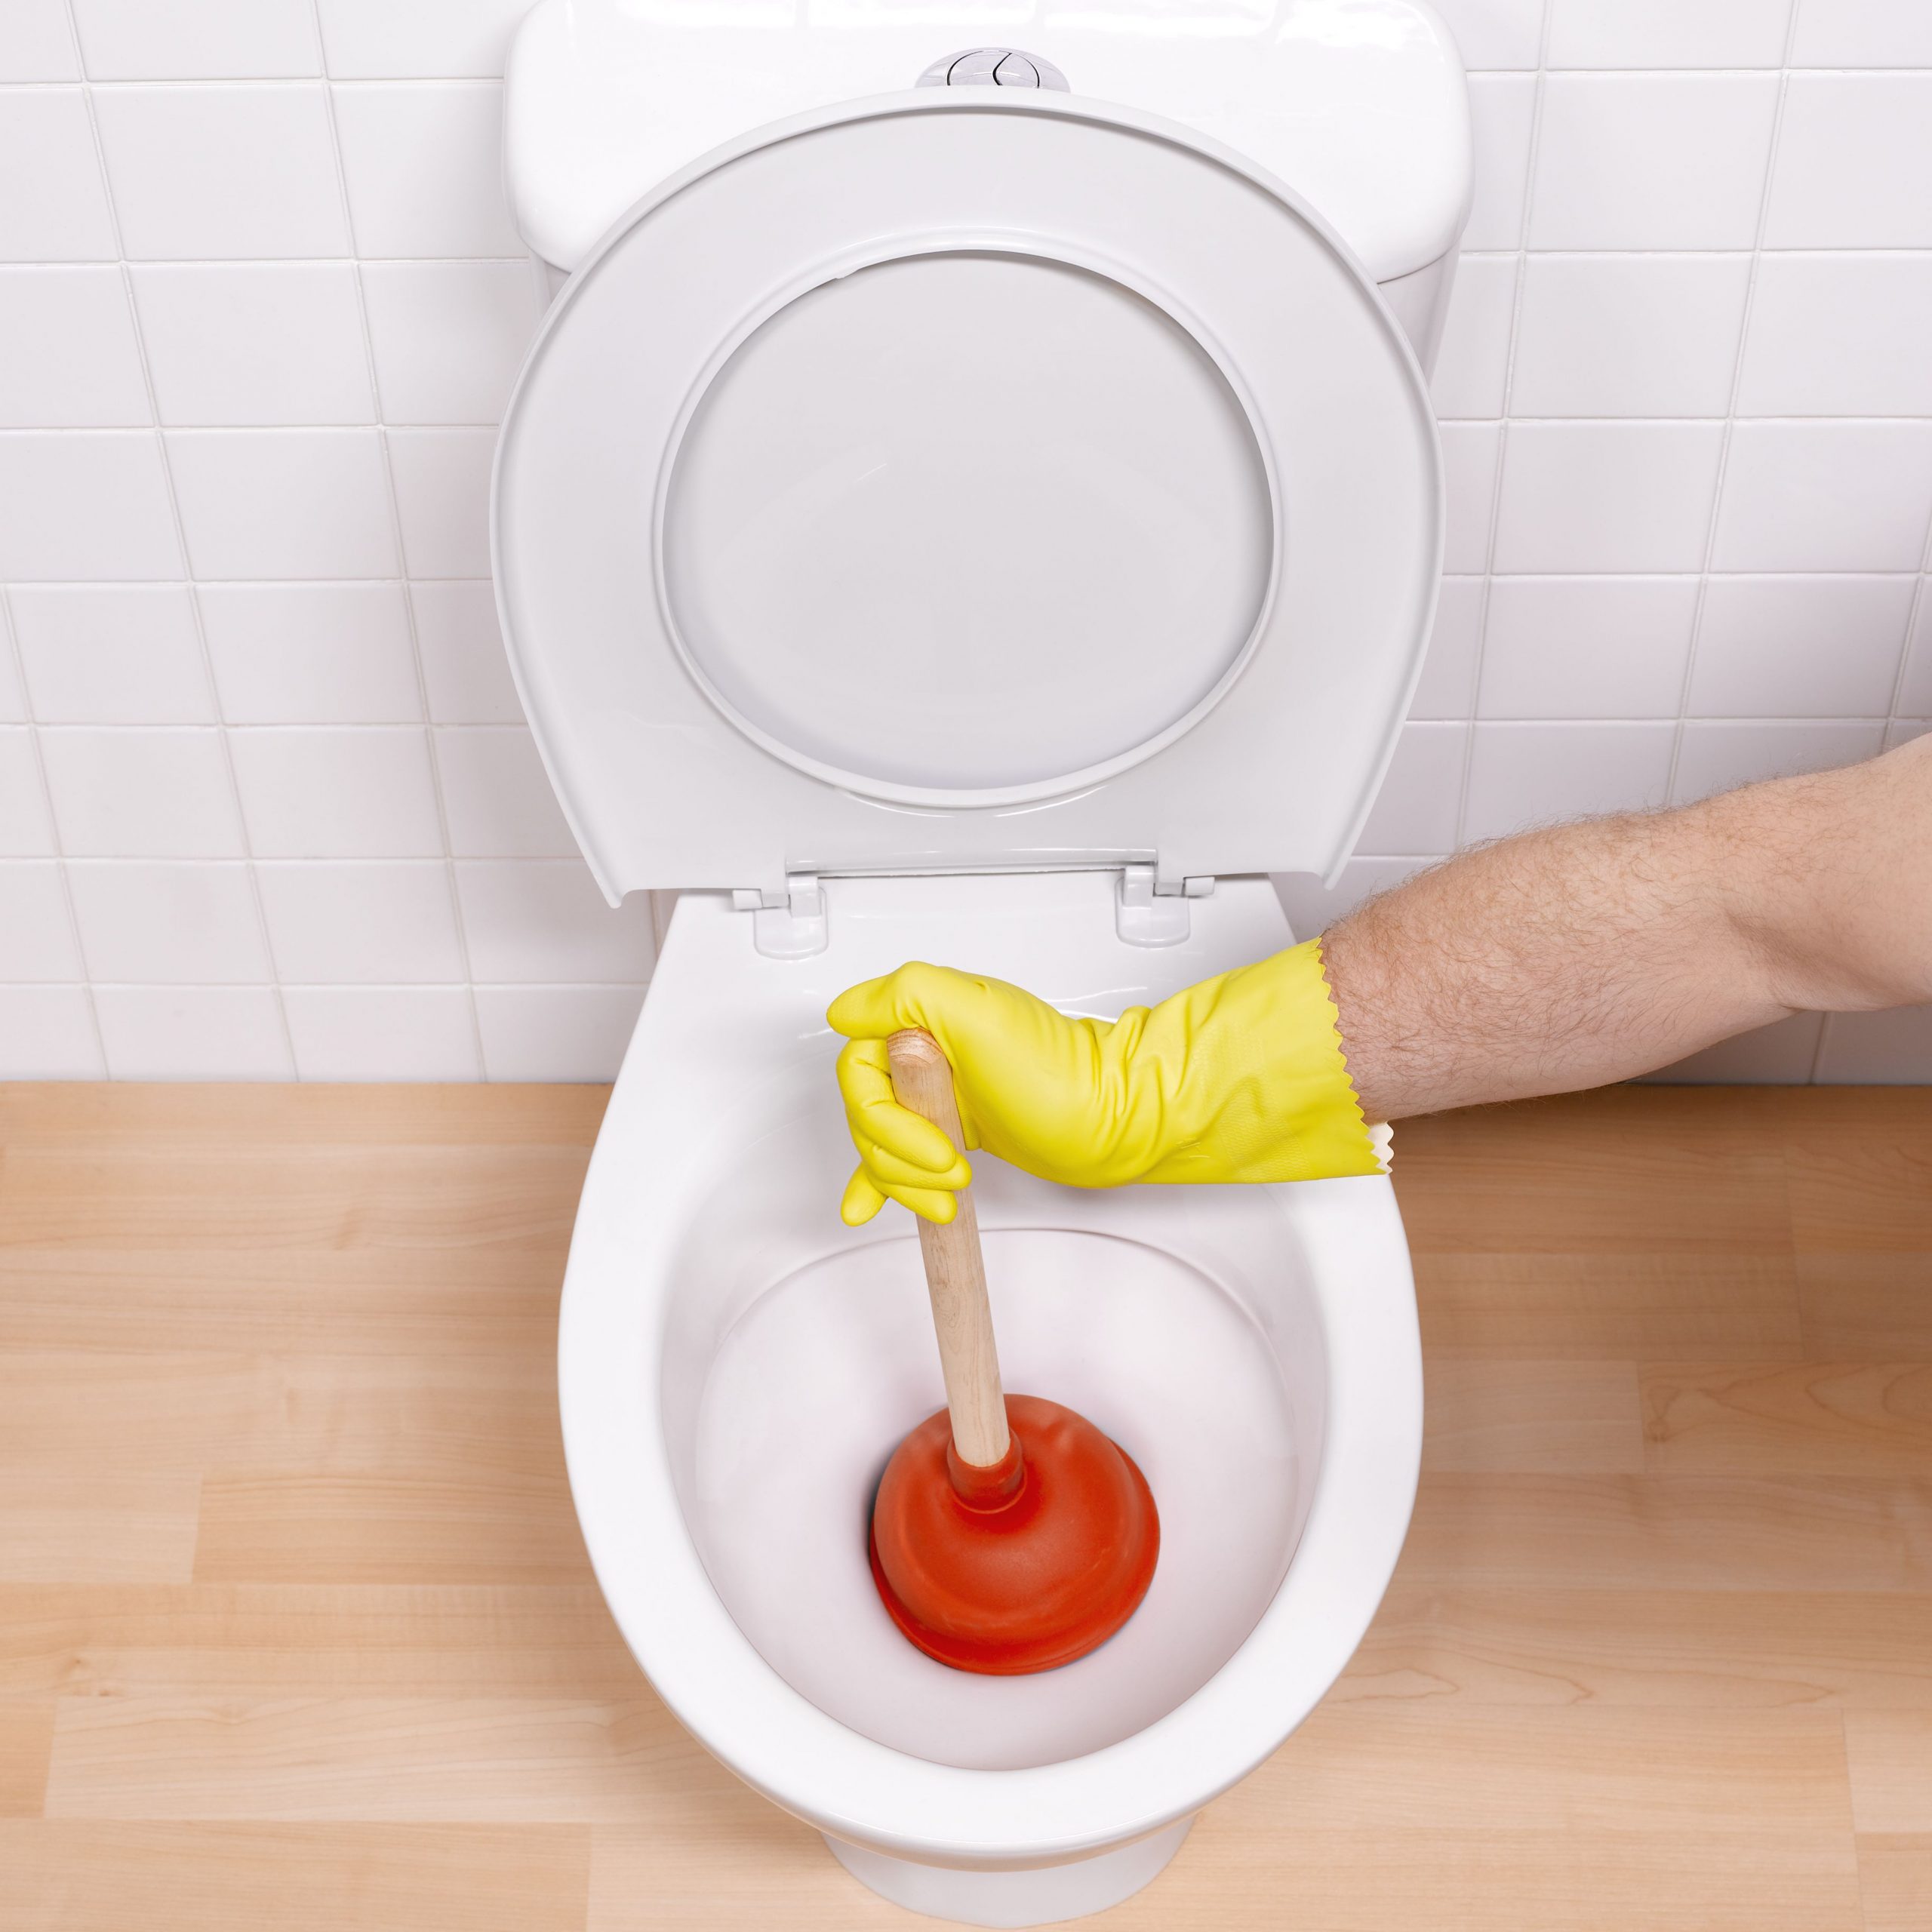 Is It Bad to Leave A Clogged Toilet Overnight? - Toilet Reviewer